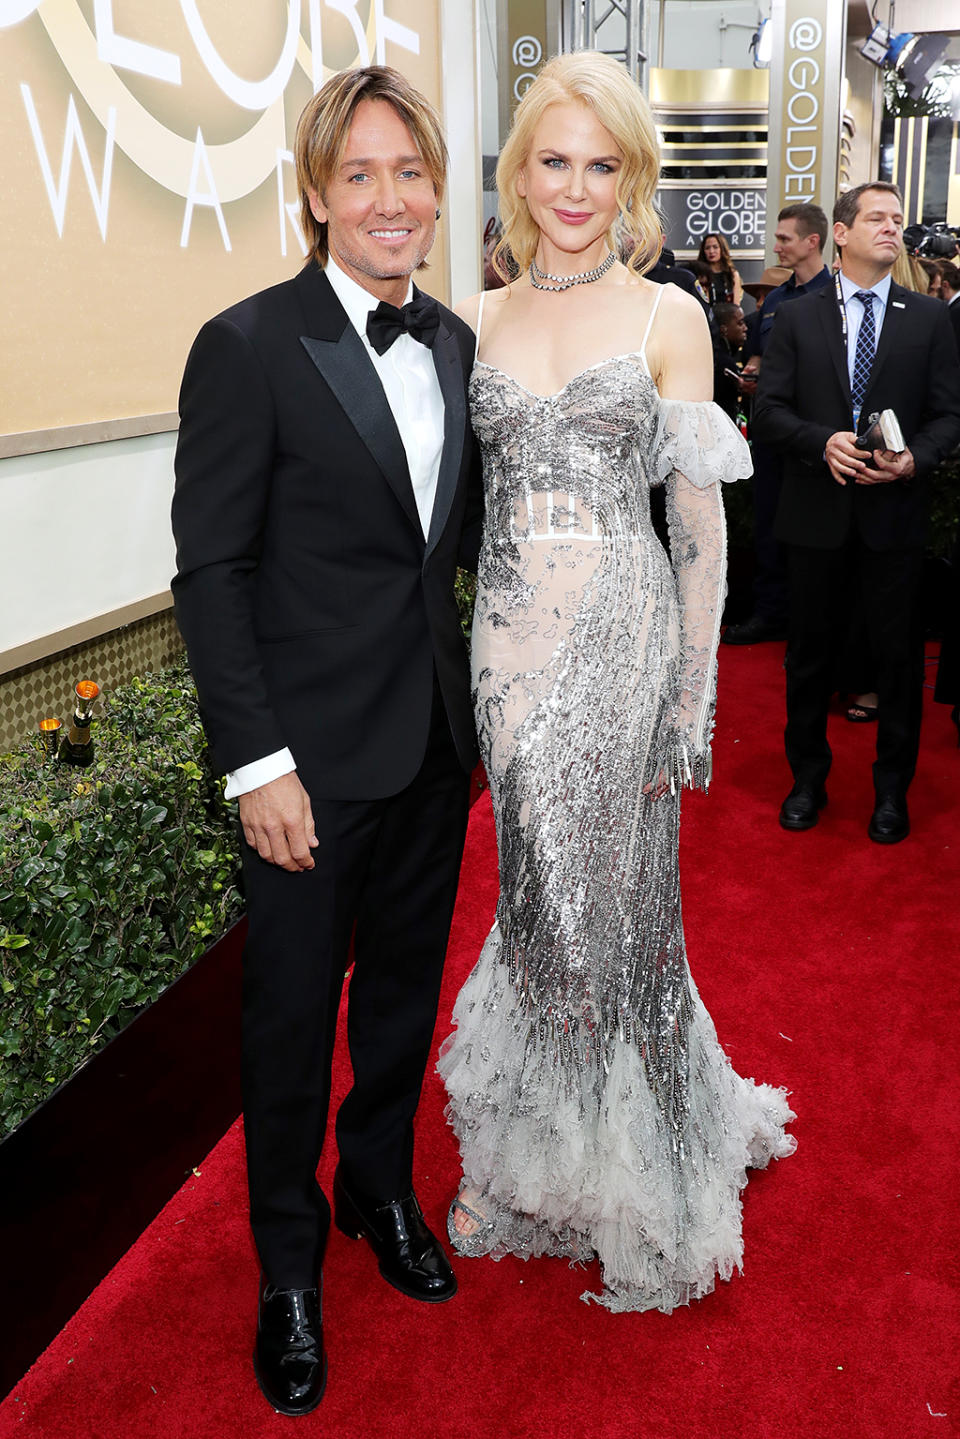 <p>Recording artist Keith Urban and actress Nicole Kidman arrive at the 74th Annual Golden Globe Awards held at the Beverly Hilton Hotel on January 8, 2017. (Photo by Neilson Barnard/NBCUniversal/NBCU Photo Bank via Getty Images) </p>